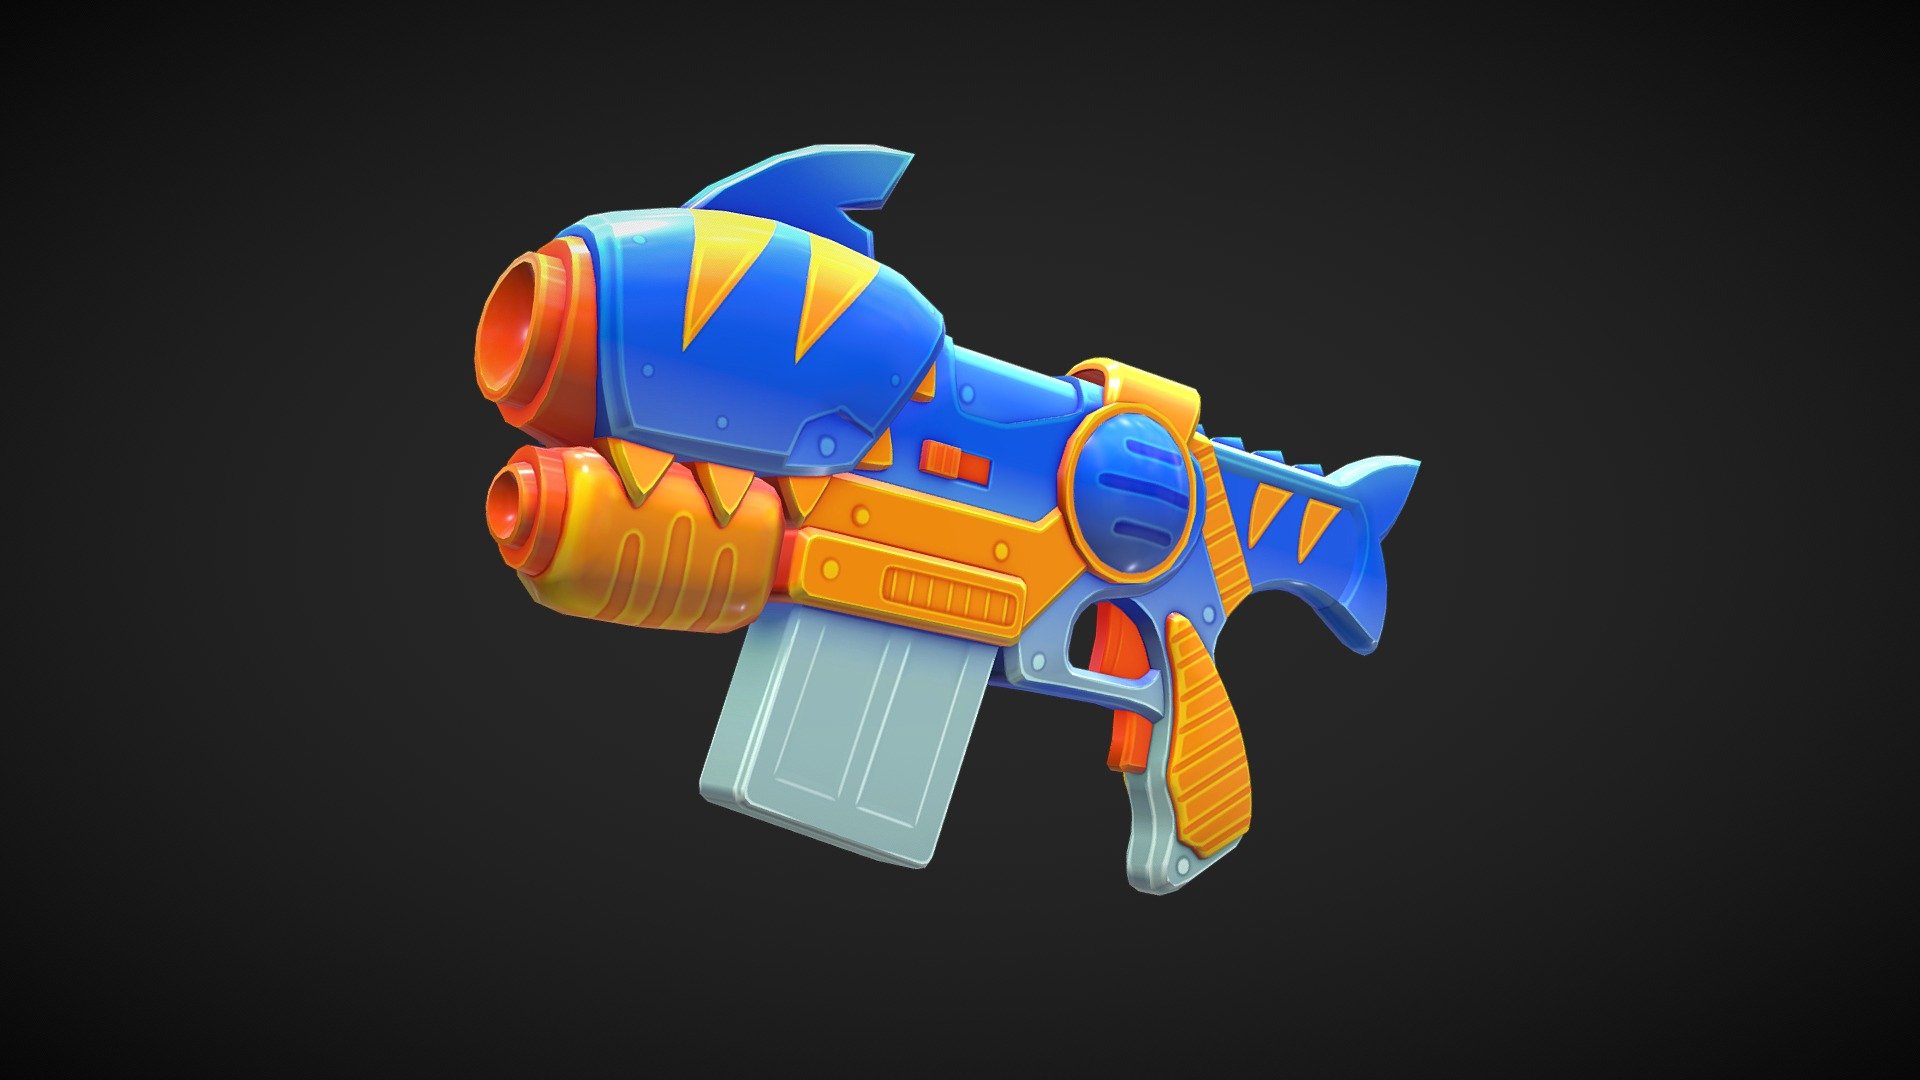 One of the many blasters I worked on for the Ryan's Dart Tag game. 
Lots more of these bad boys up on my Artstation, feel free to check them out here:
https://www.artstation.com/artwork/rJz50O - Ryan's Dart Tag Blaster - 3D model by HarryStringer 3d model